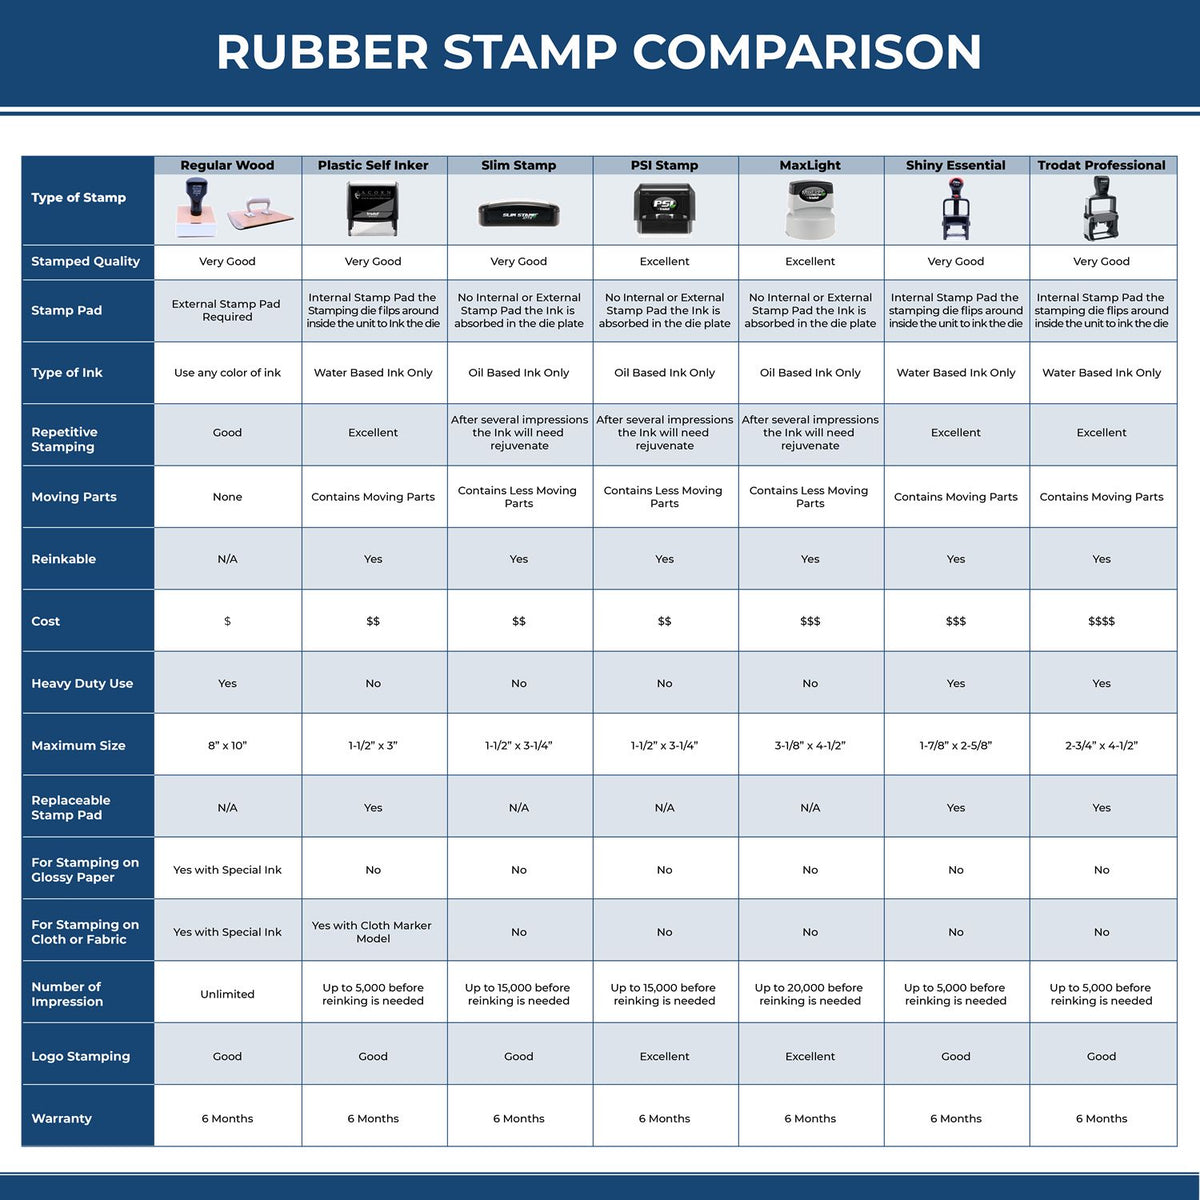 Large Self Inking Bold Revised Stamp 4152S Rubber Stamp Comparison